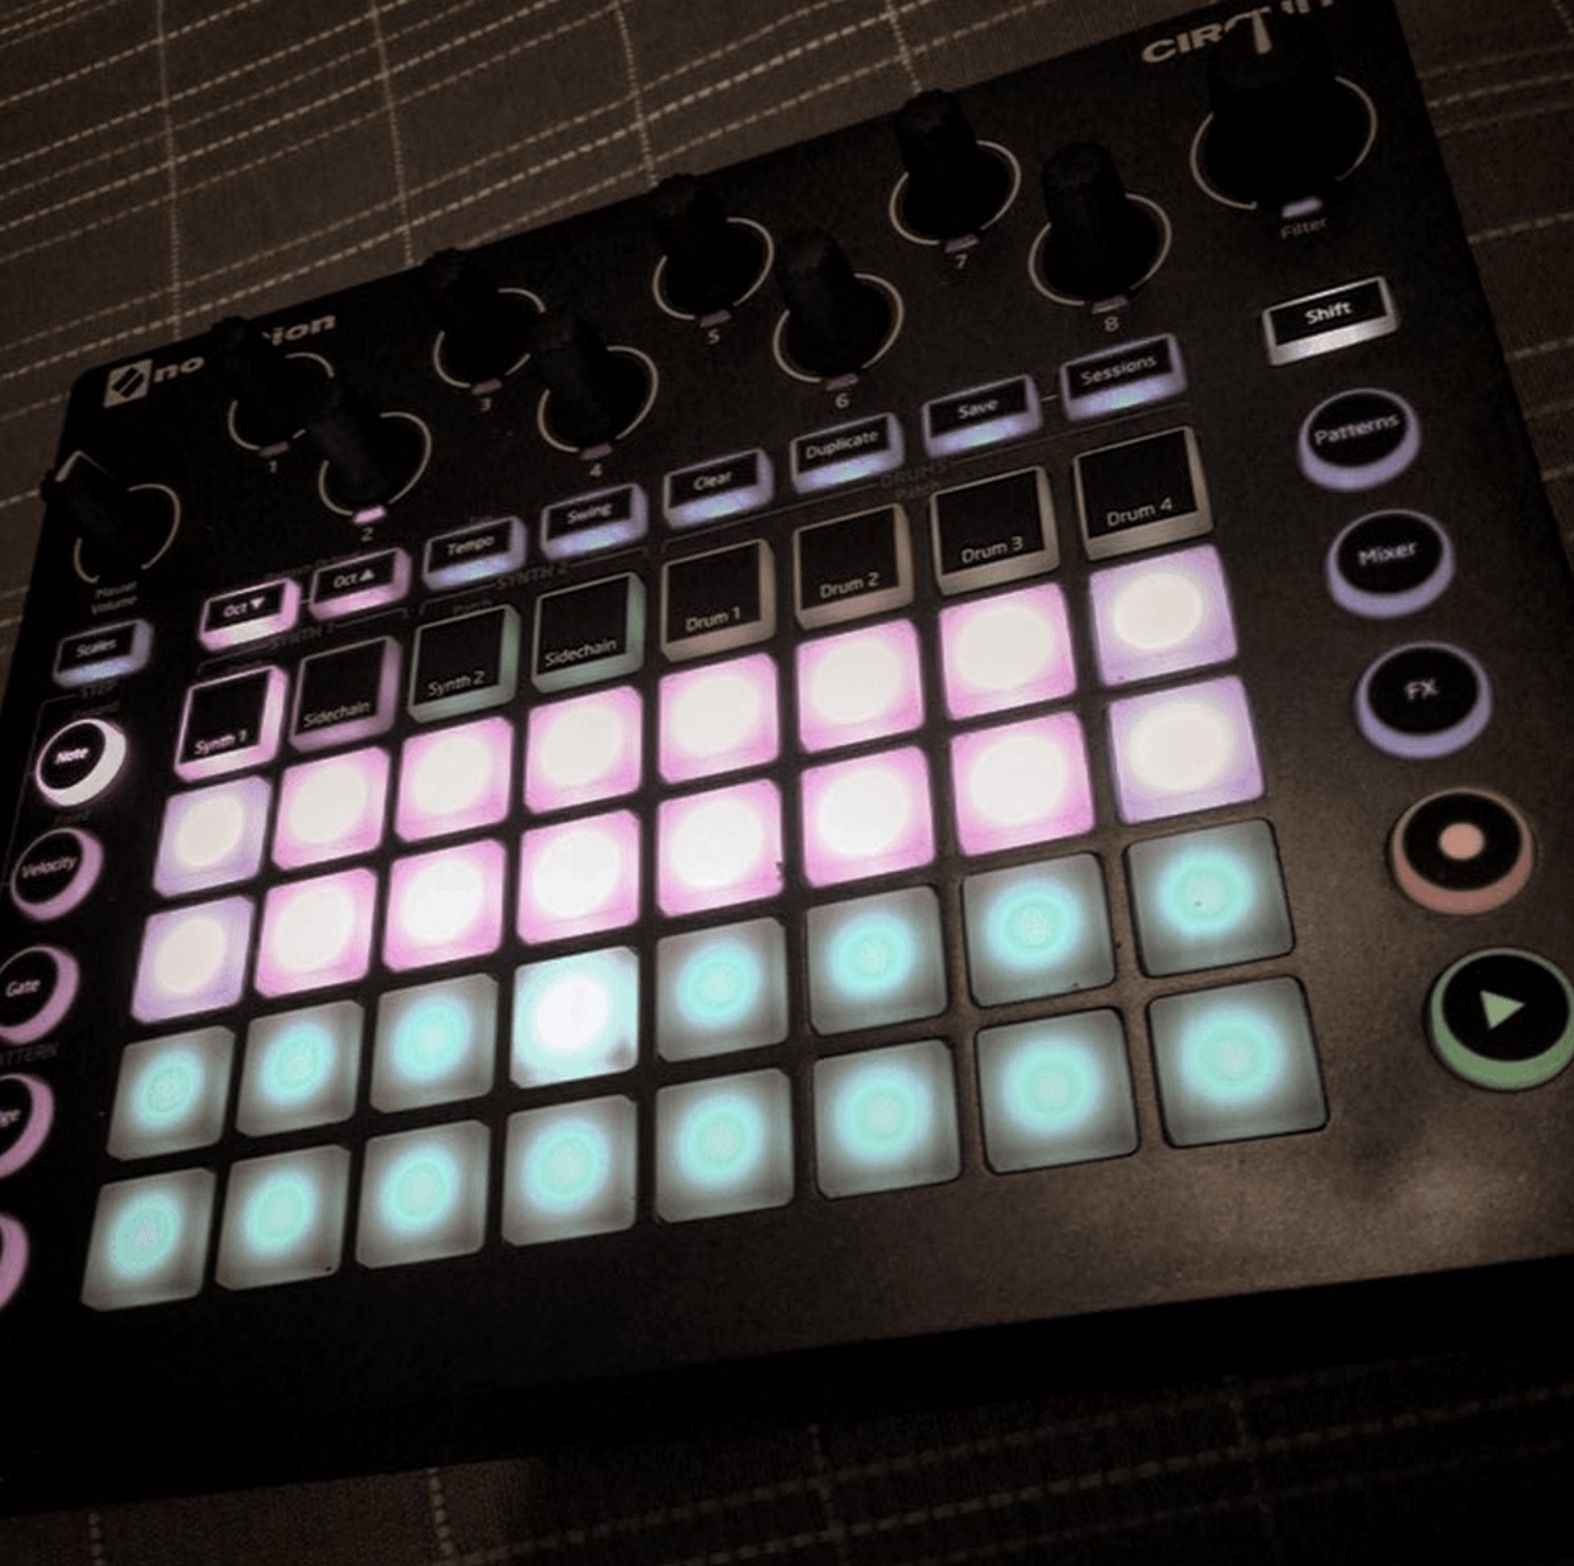 New Novation Machine that we can't talk about or reveal the name of... yet!